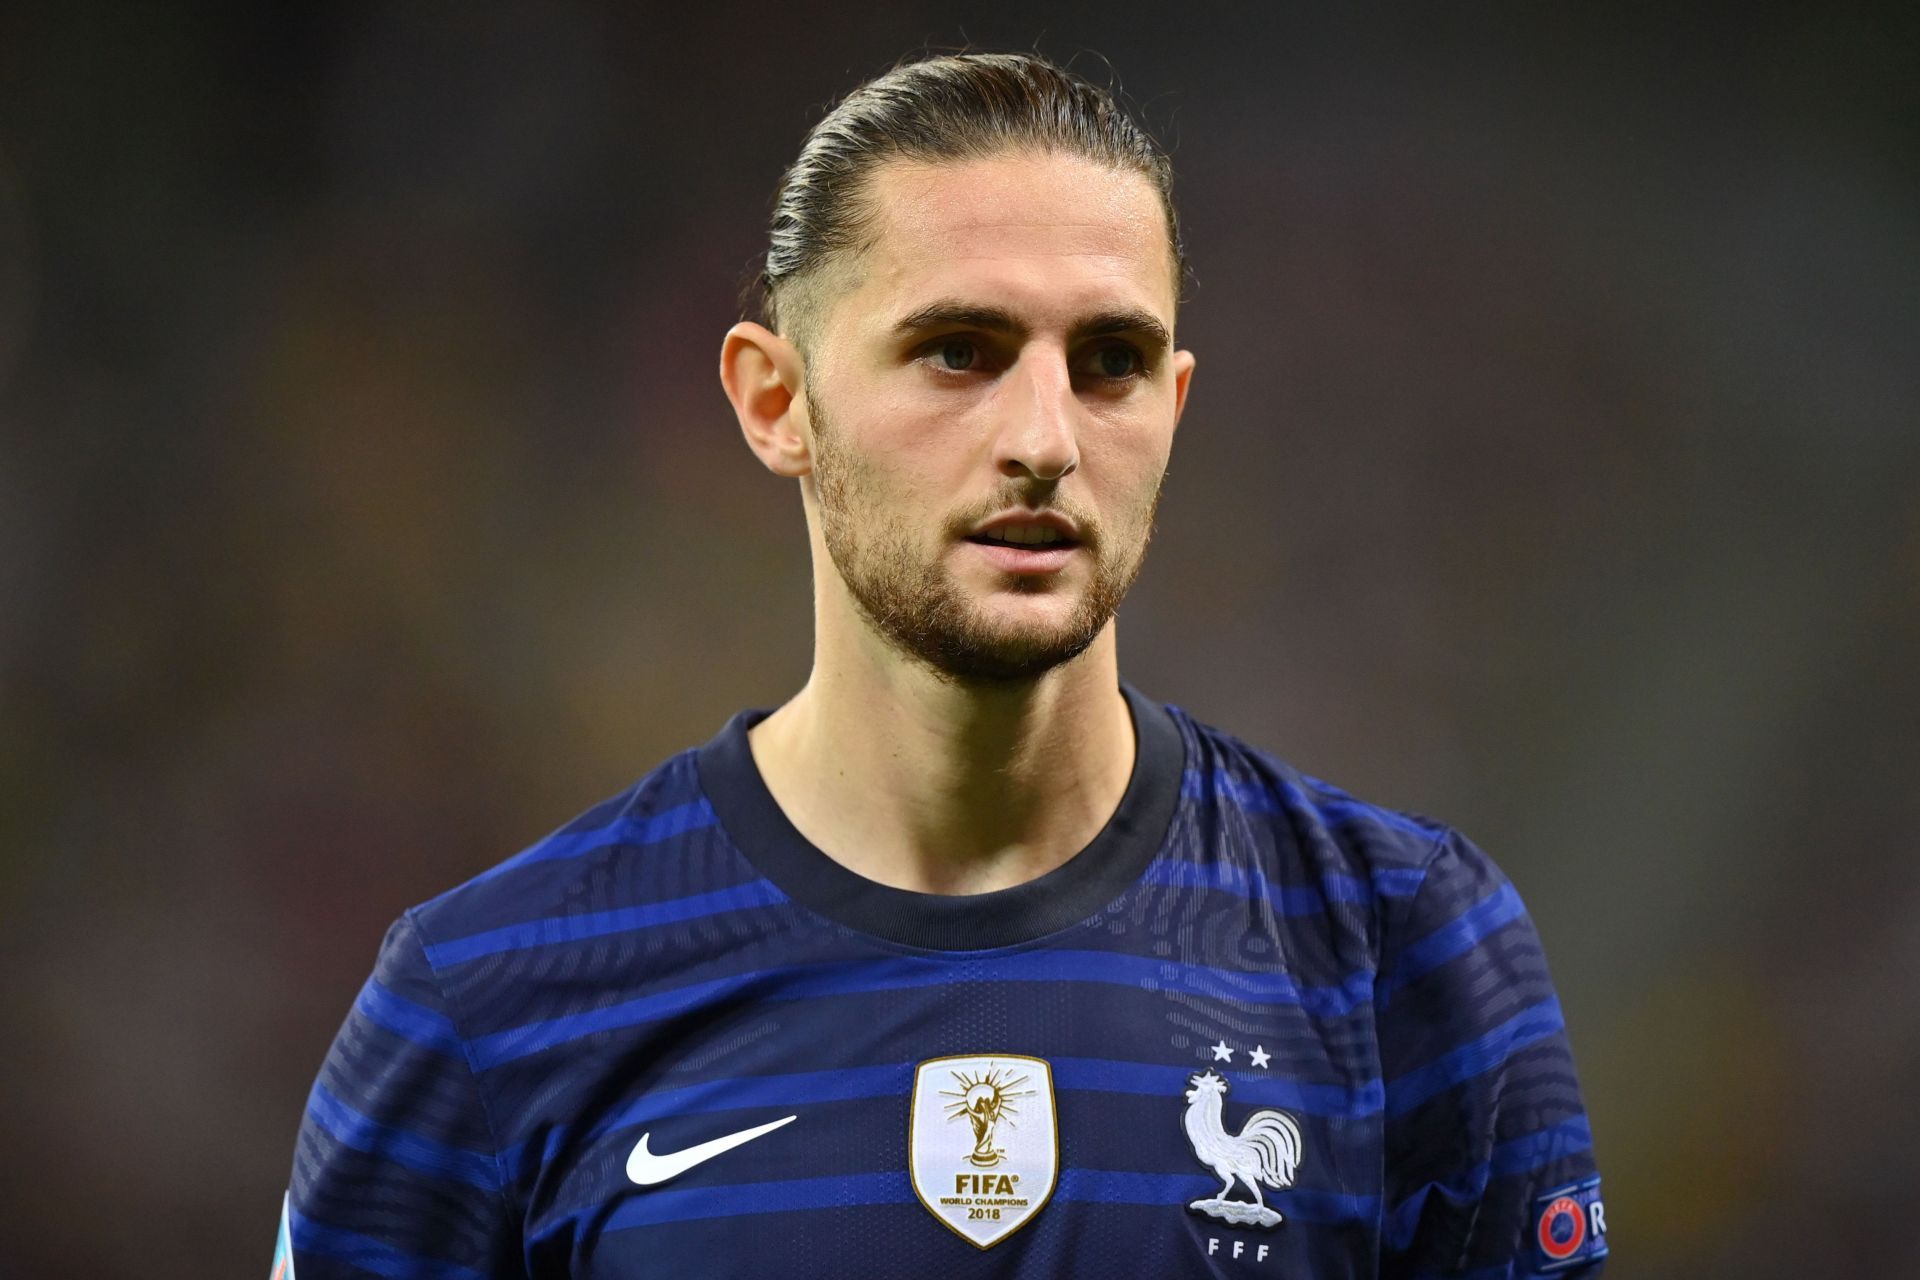 Chelsea have entered the race to sign Adrien Rabiot.